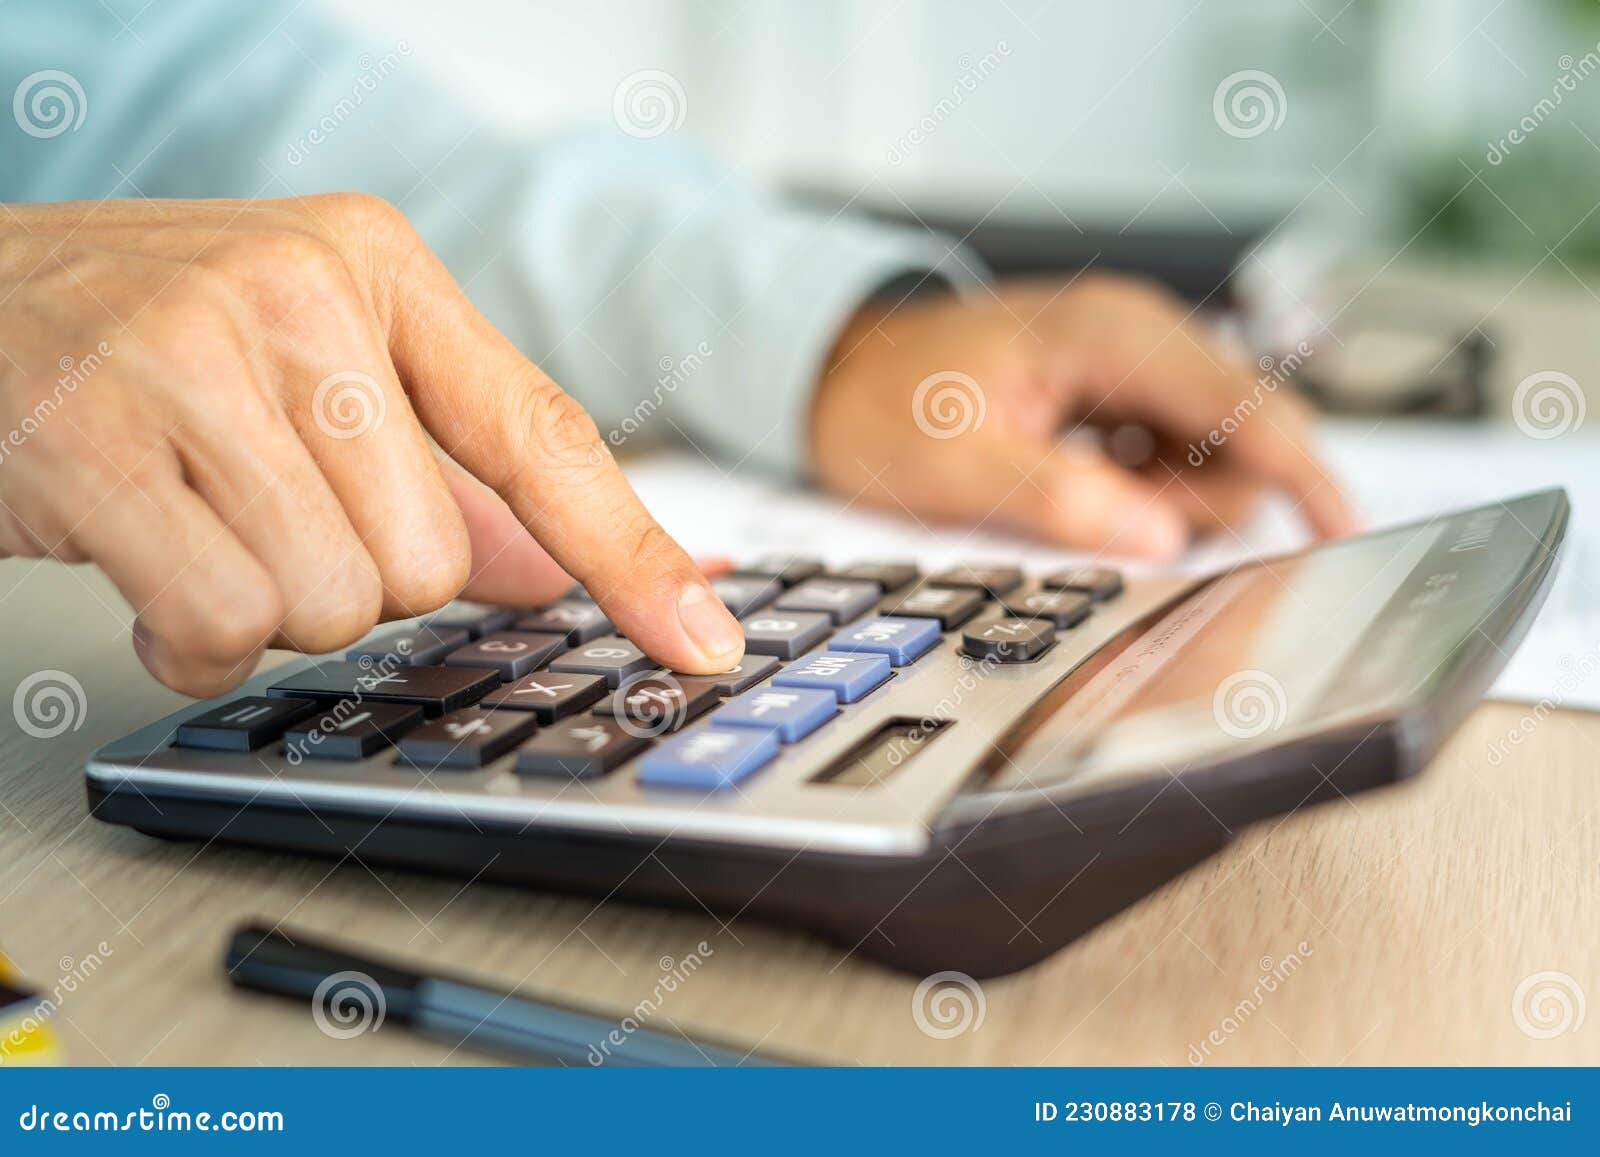 the-butler-is-pressing-the-calculator-calculate-the-various-costs-that